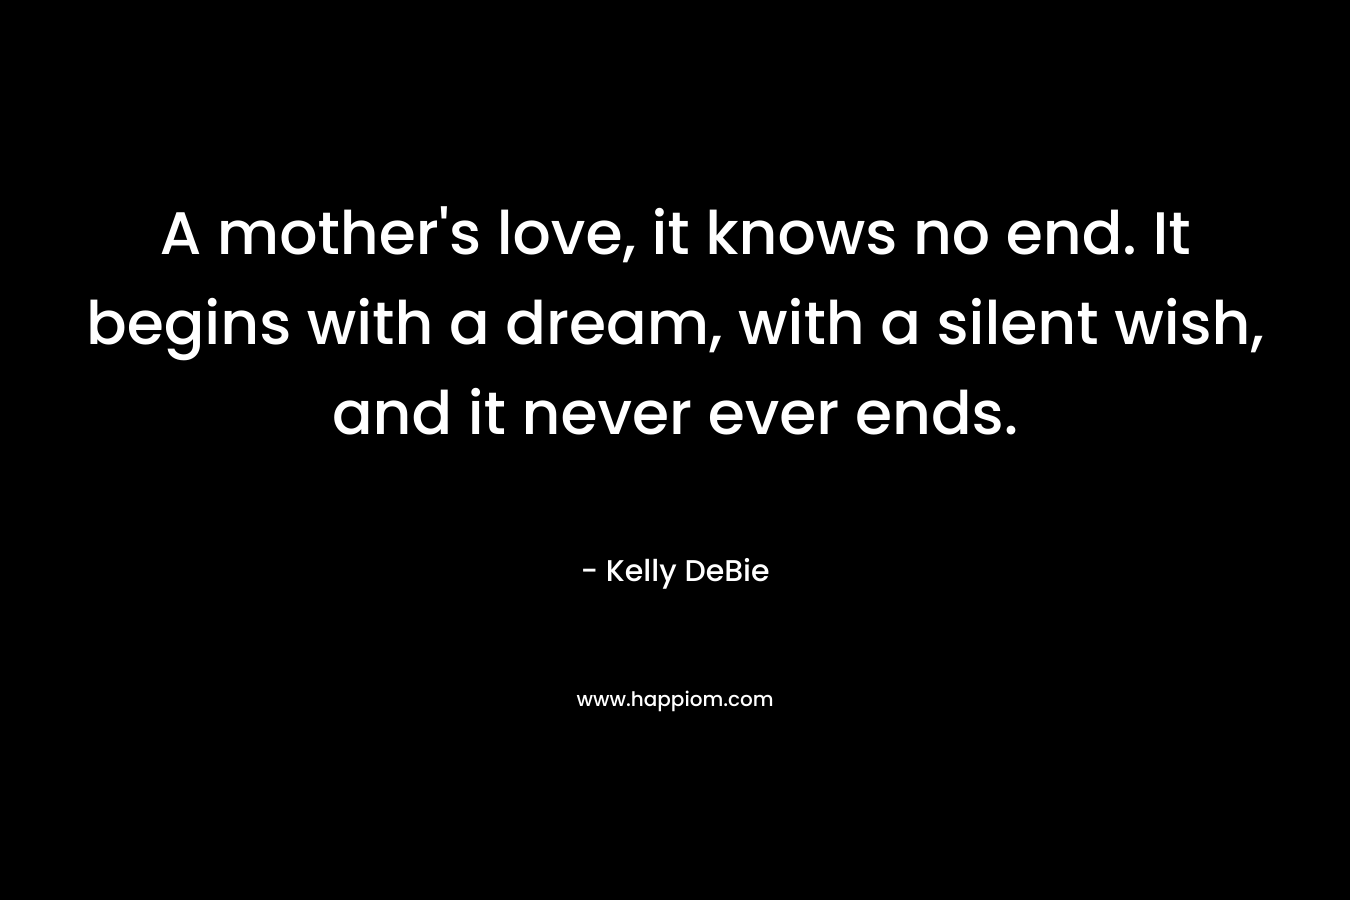 A mother’s love, it knows no end. It begins with a dream, with a silent wish, and it never ever ends. – Kelly DeBie